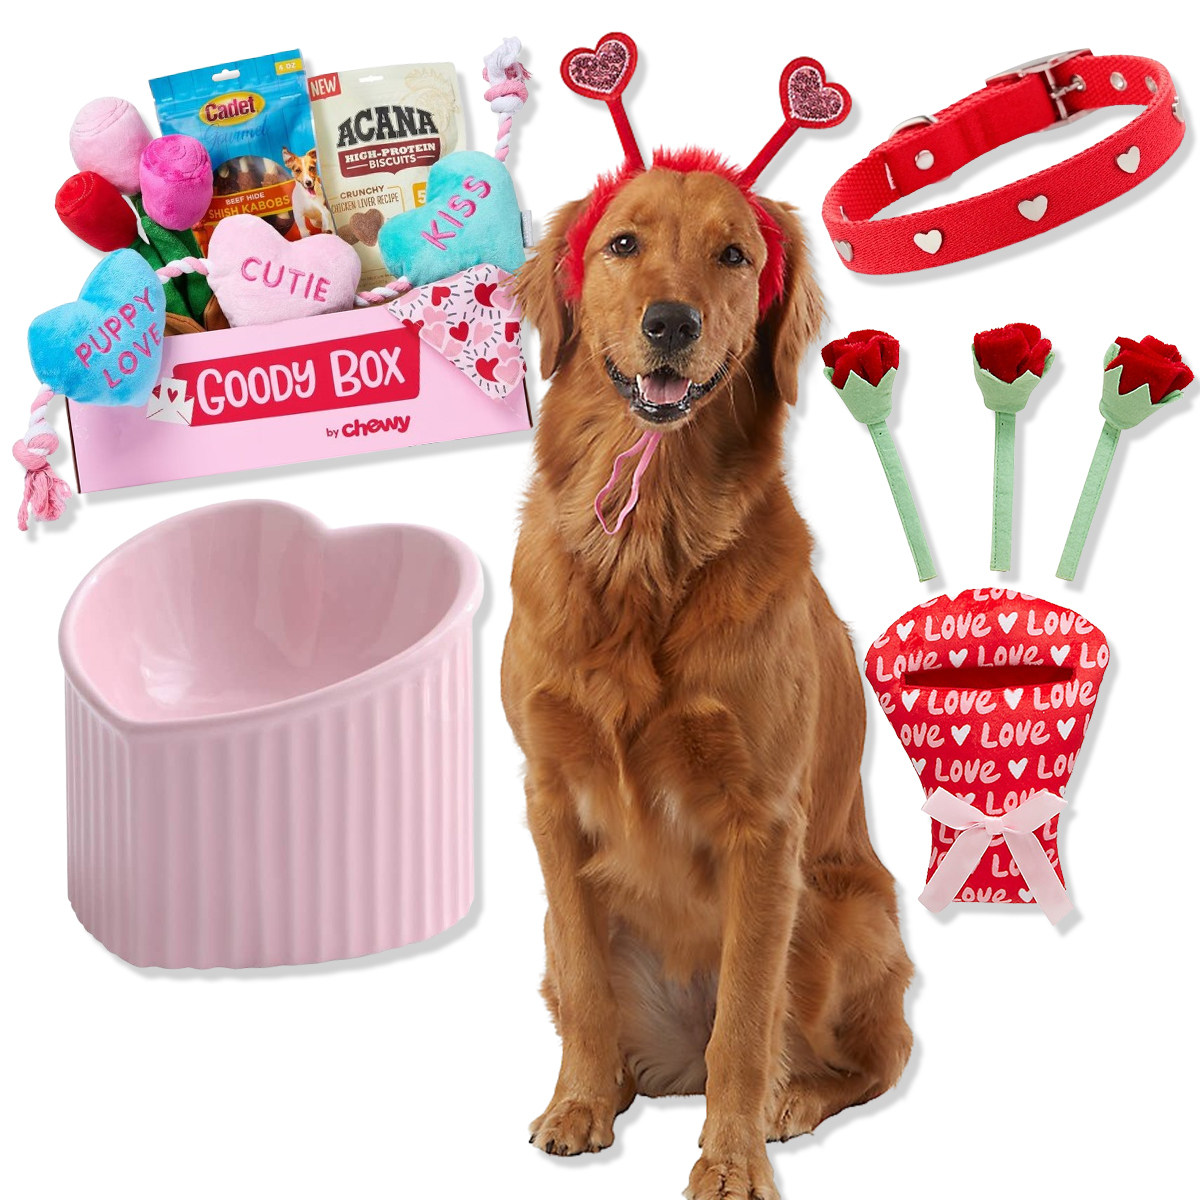 https://akns-images.eonline.com/eol_images/Entire_Site/202312/rs_1200x1200-230202134827-1200-Ecomm-Valentines_Day_Gifts_For_Pets.jpg?fit=around%7C1080:1080&output-quality=90&crop=1080:1080;center,top